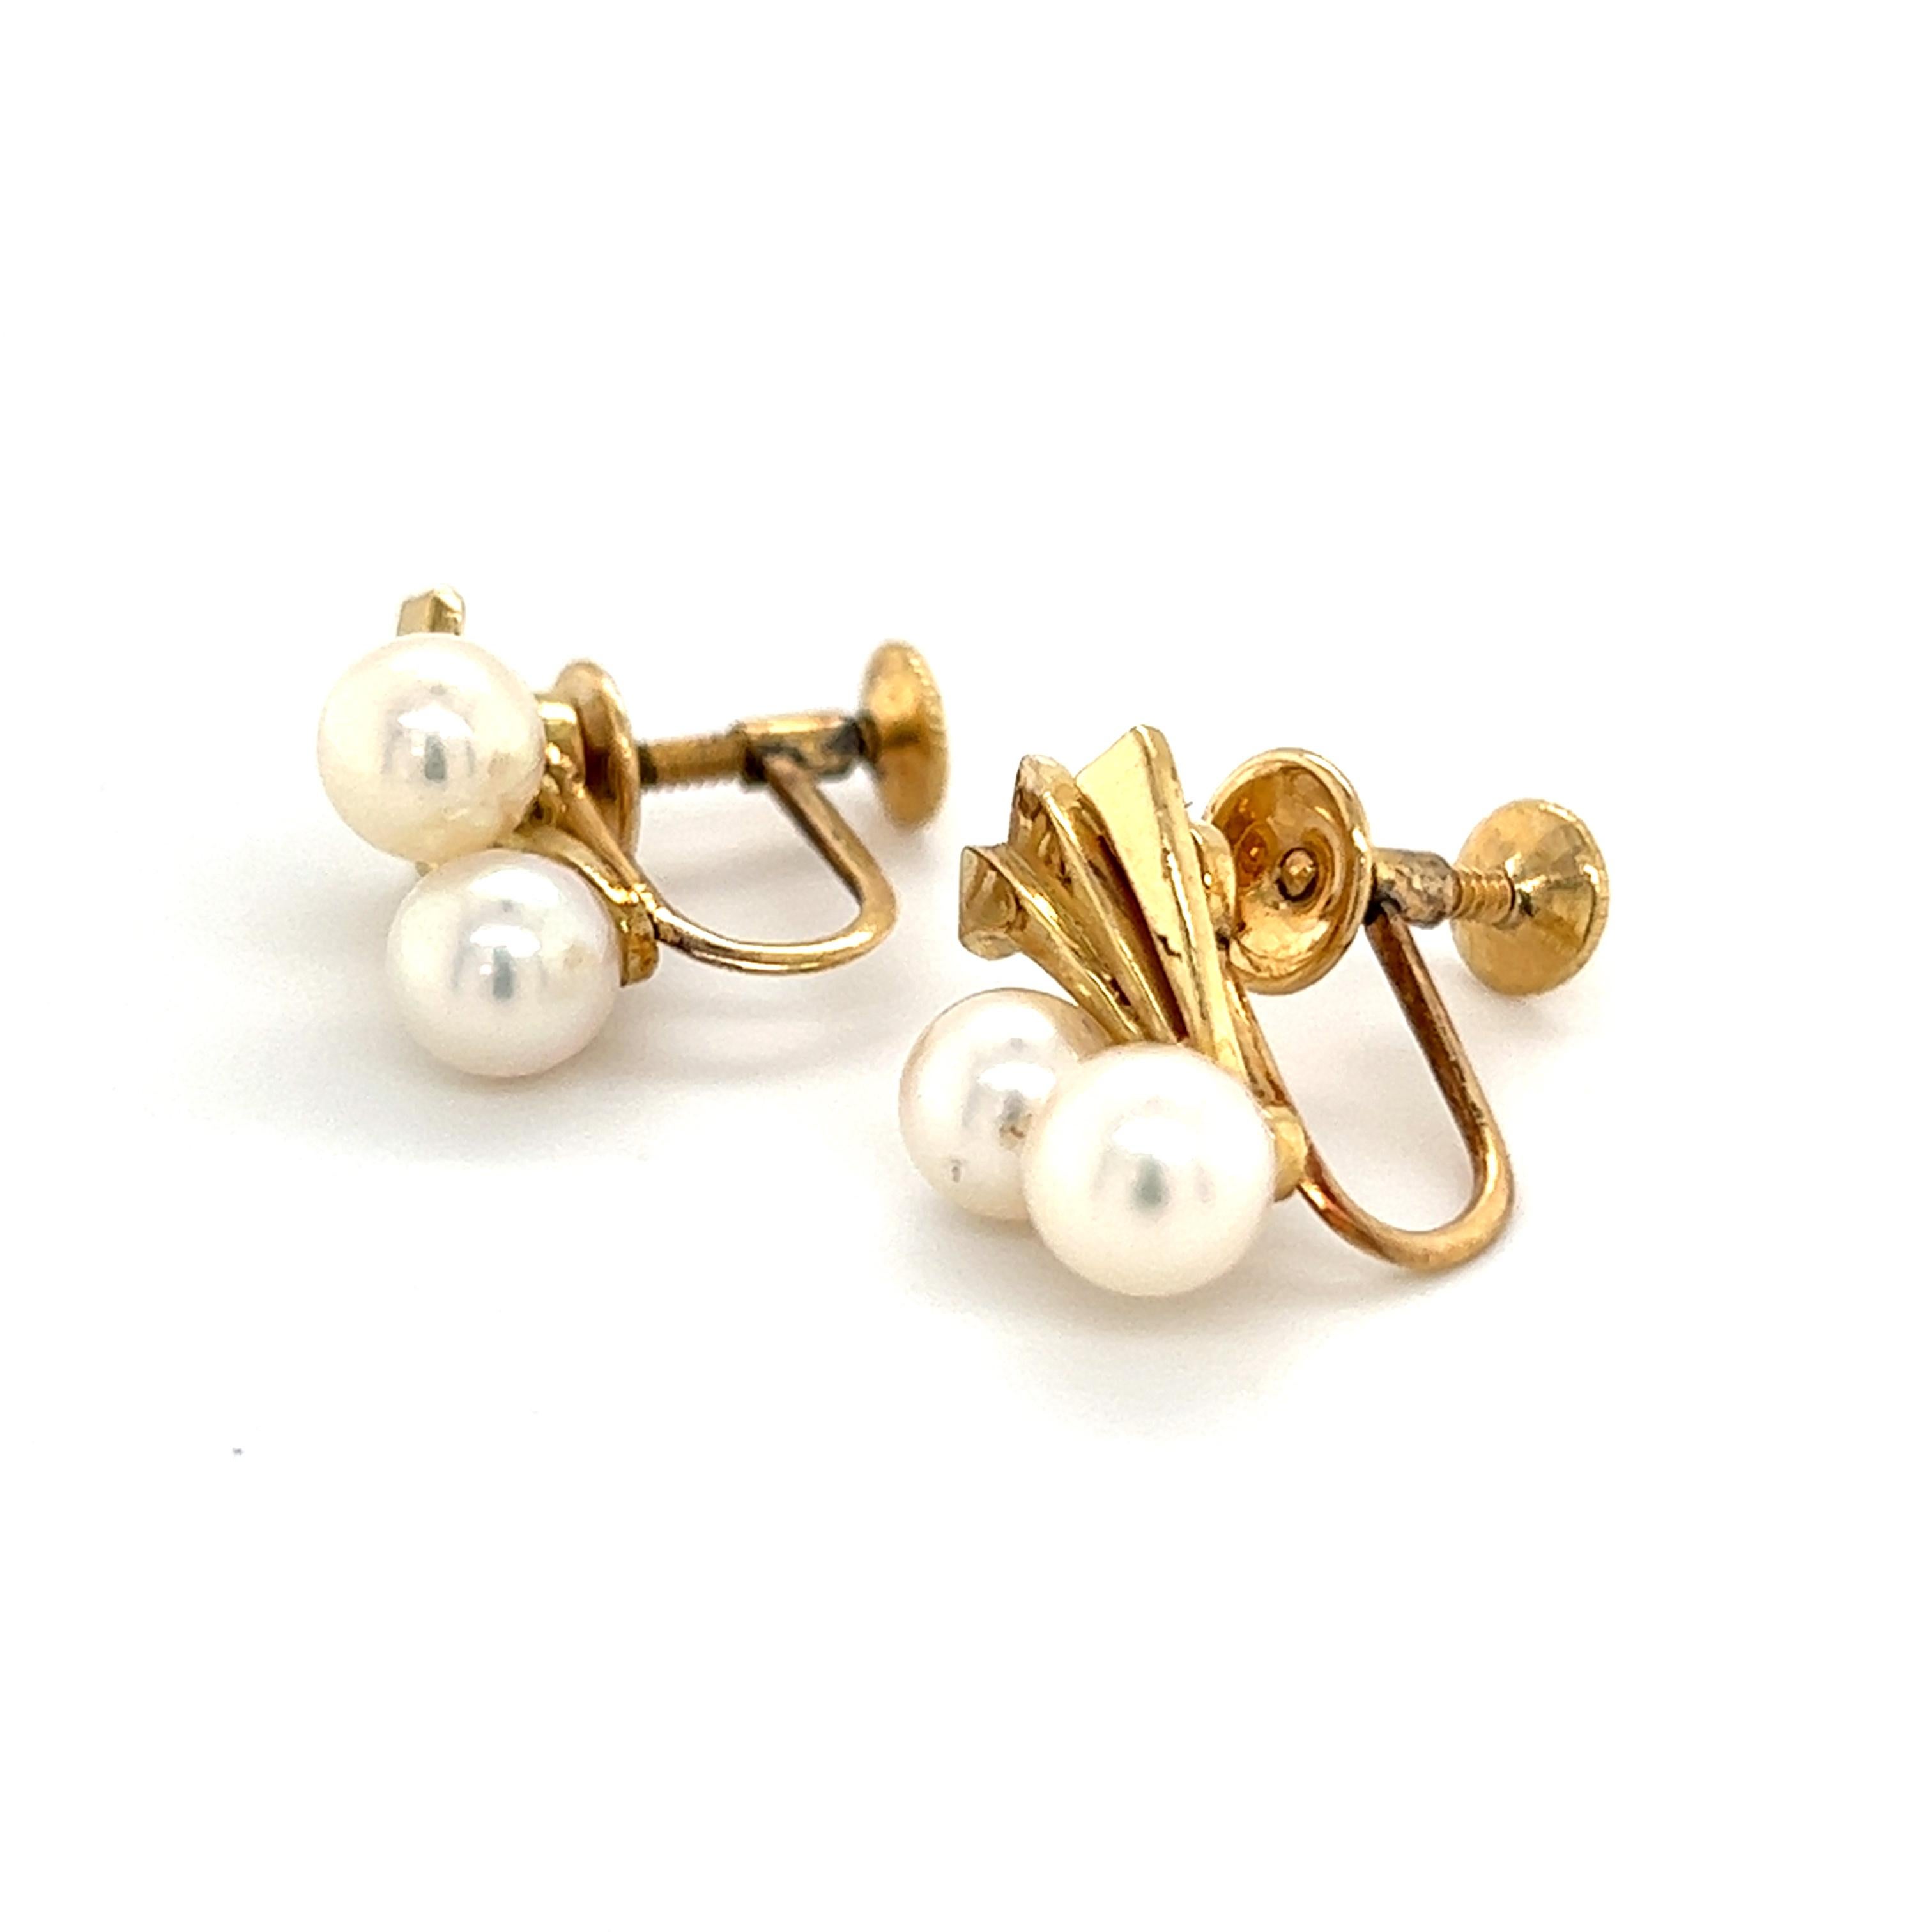 Mikimoto Estate Akoya Pearl Earrings 14k Gold 5.70 mm 4.5 Grams M252

These elegant Authentic Mikimoto Estate Akoya pearl earrings are made of 14 karats yellow gold and have 4 Akoya Cultured Pearls in size of 5.7 mm with a weight of 4.5